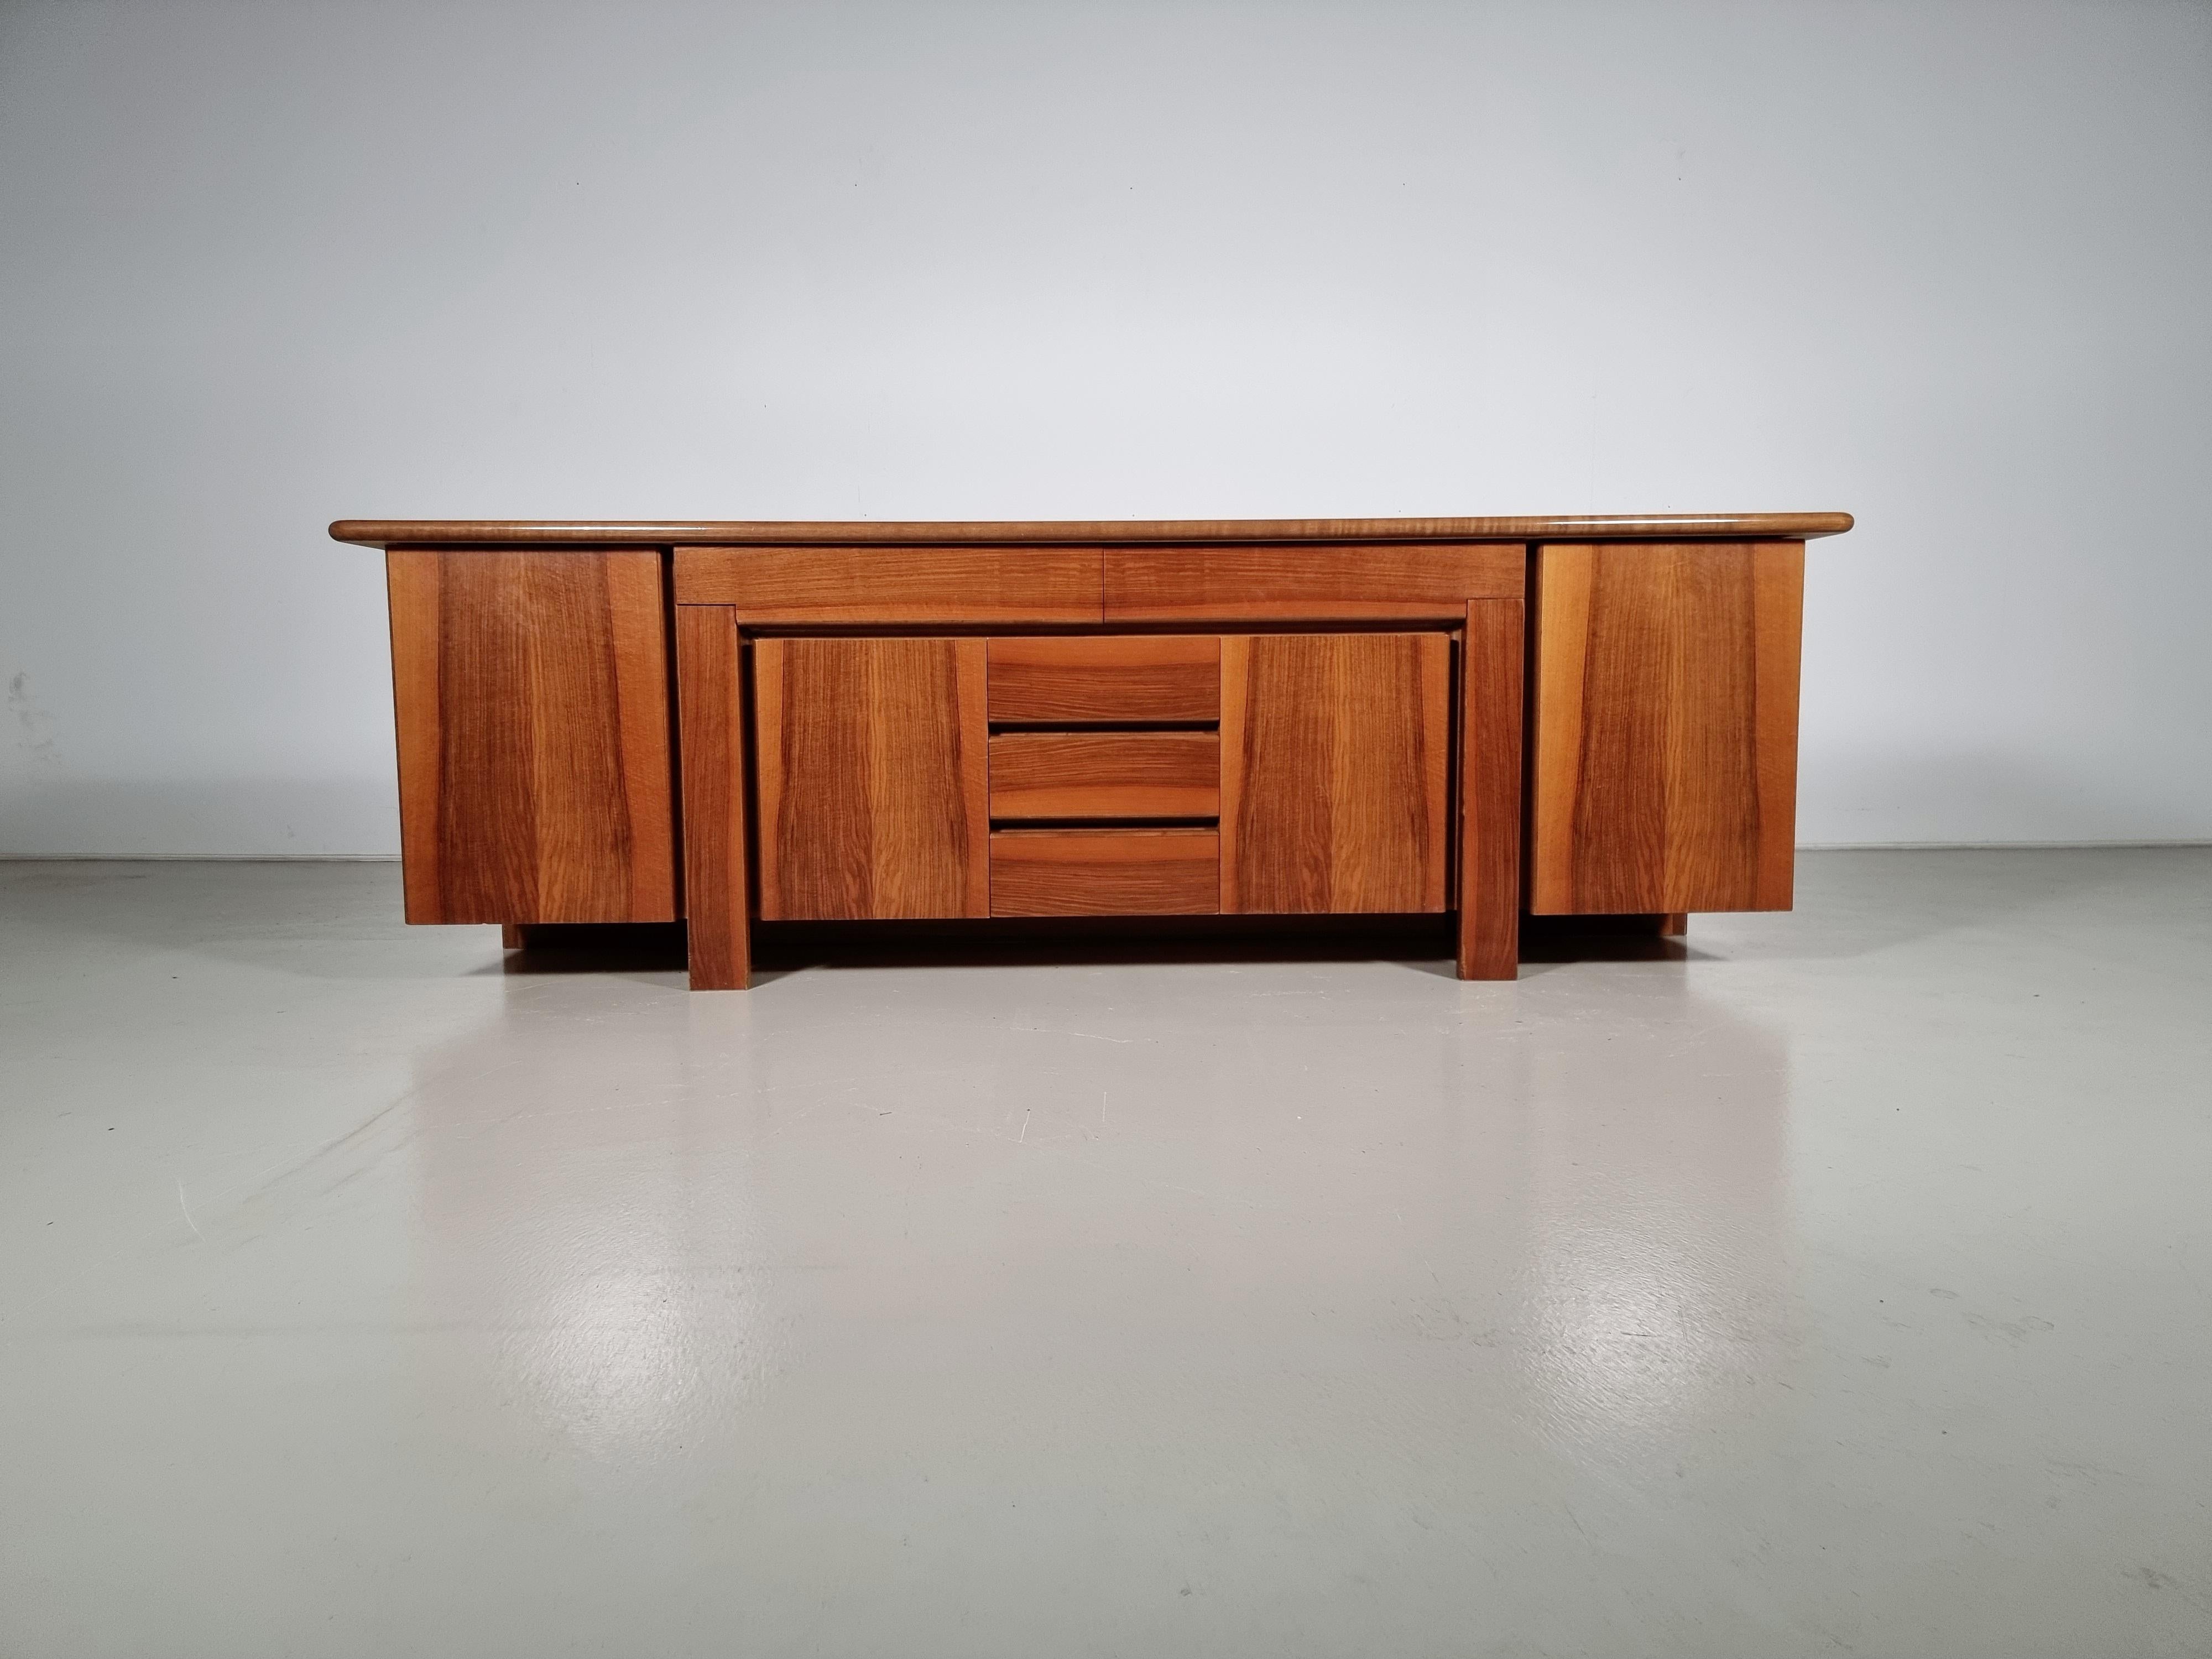 Mario Marenco for Mobil Girgi, sideboard model 'Sapporo', walnut, Italy, 1970s

Credenza by Mario Marenco, featuring a high level of craftsmanship in woodwork. The whole construction is finished with beveled edges. Because of its rectangular